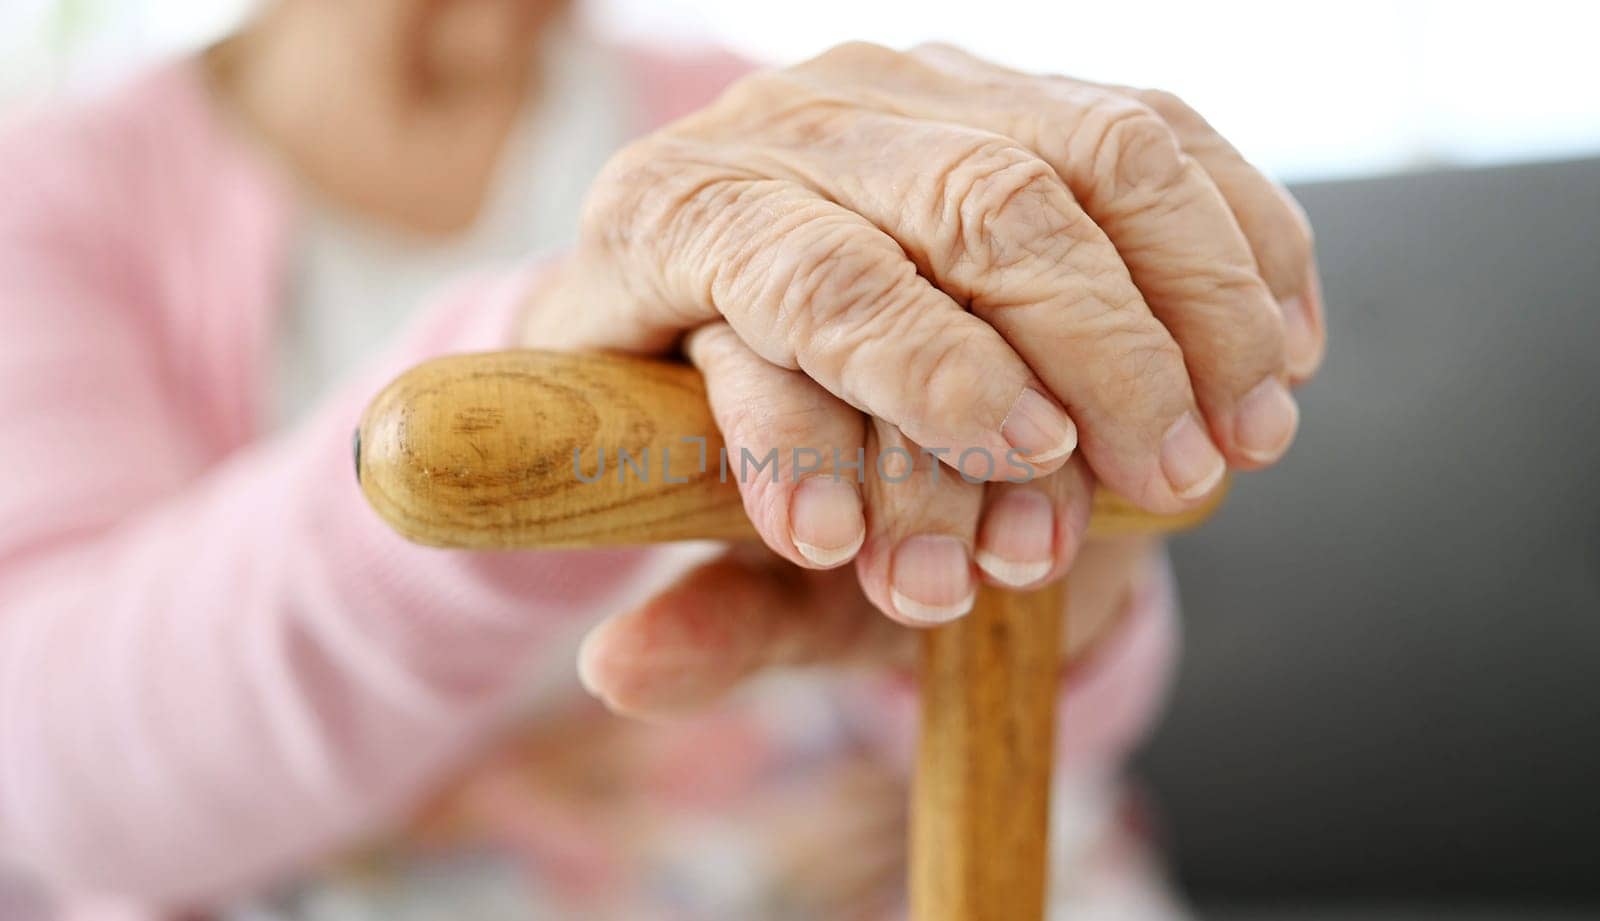 Hands Of Old Woman With Cane by GekaSkr